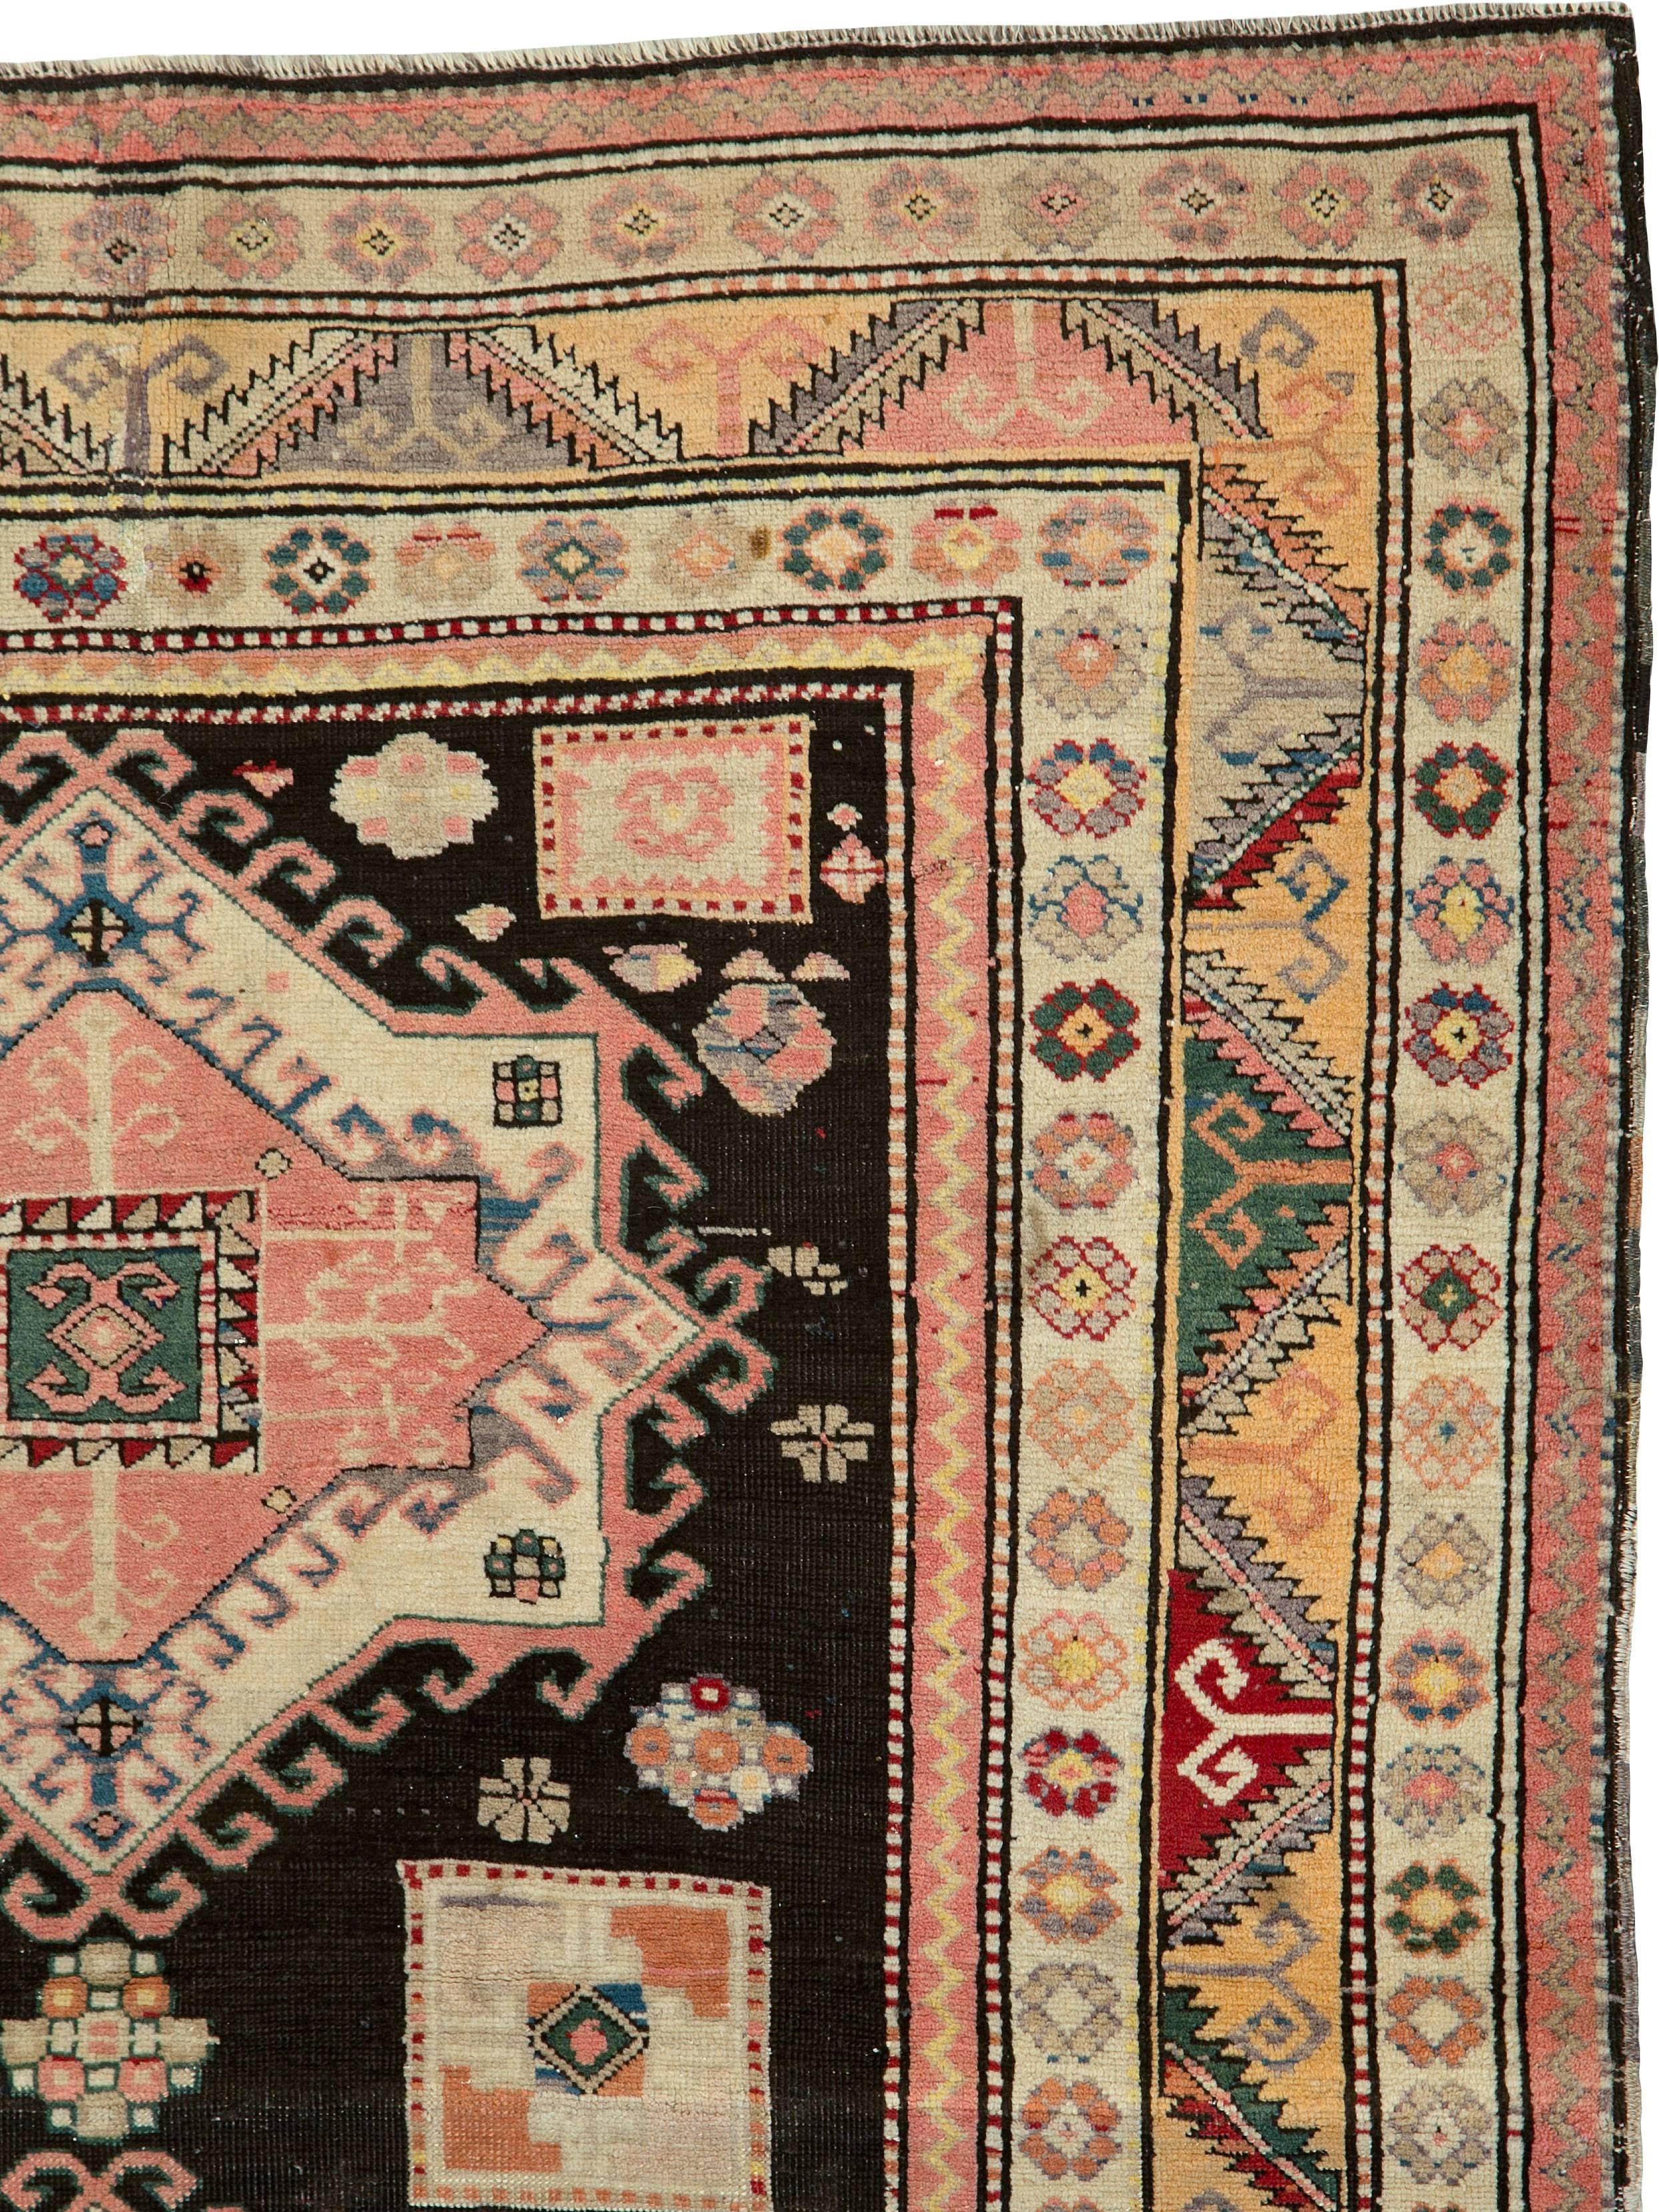 An antique Russian Karabagh carpet from the second quarter of the 20th century.